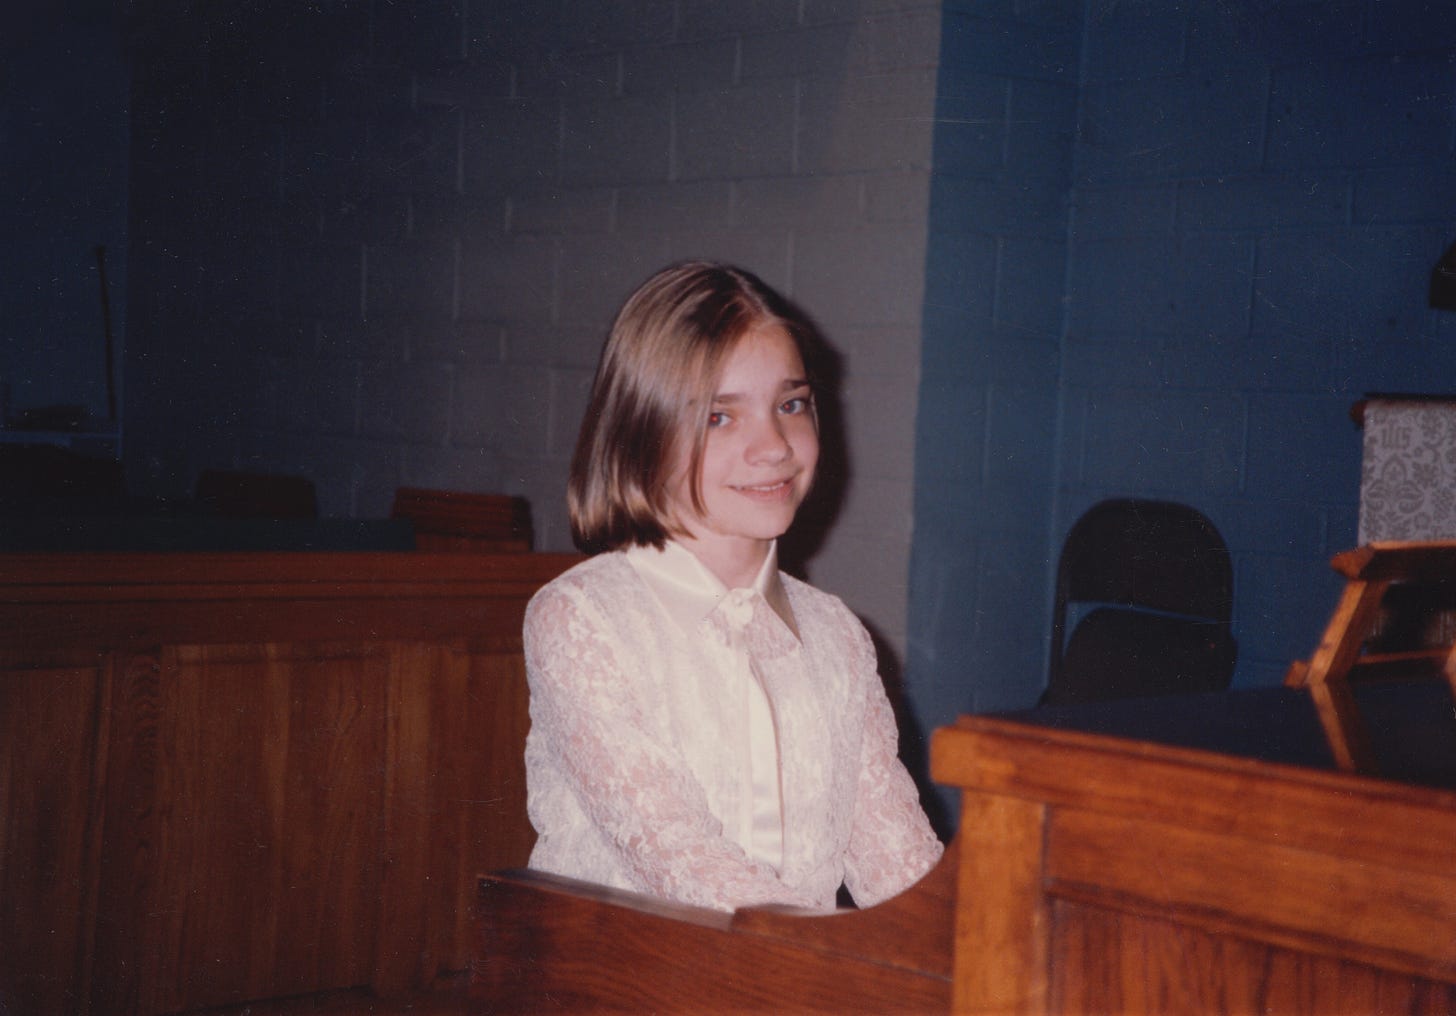 A photo of me fake smiling at the camera during a piano recital in grade school.